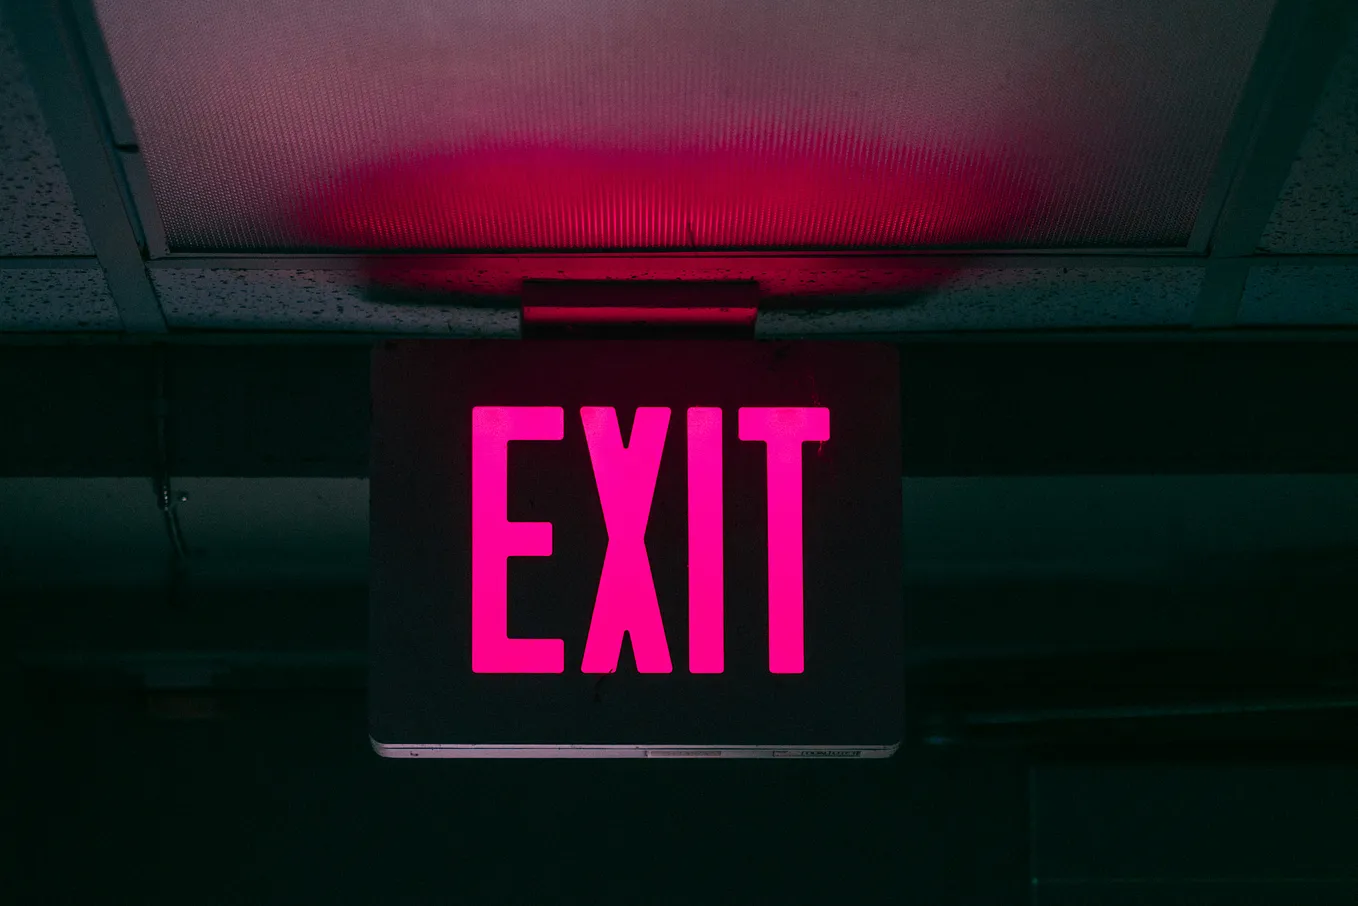 Neon pink “EXIT” sign illuminated against a dark ceiling